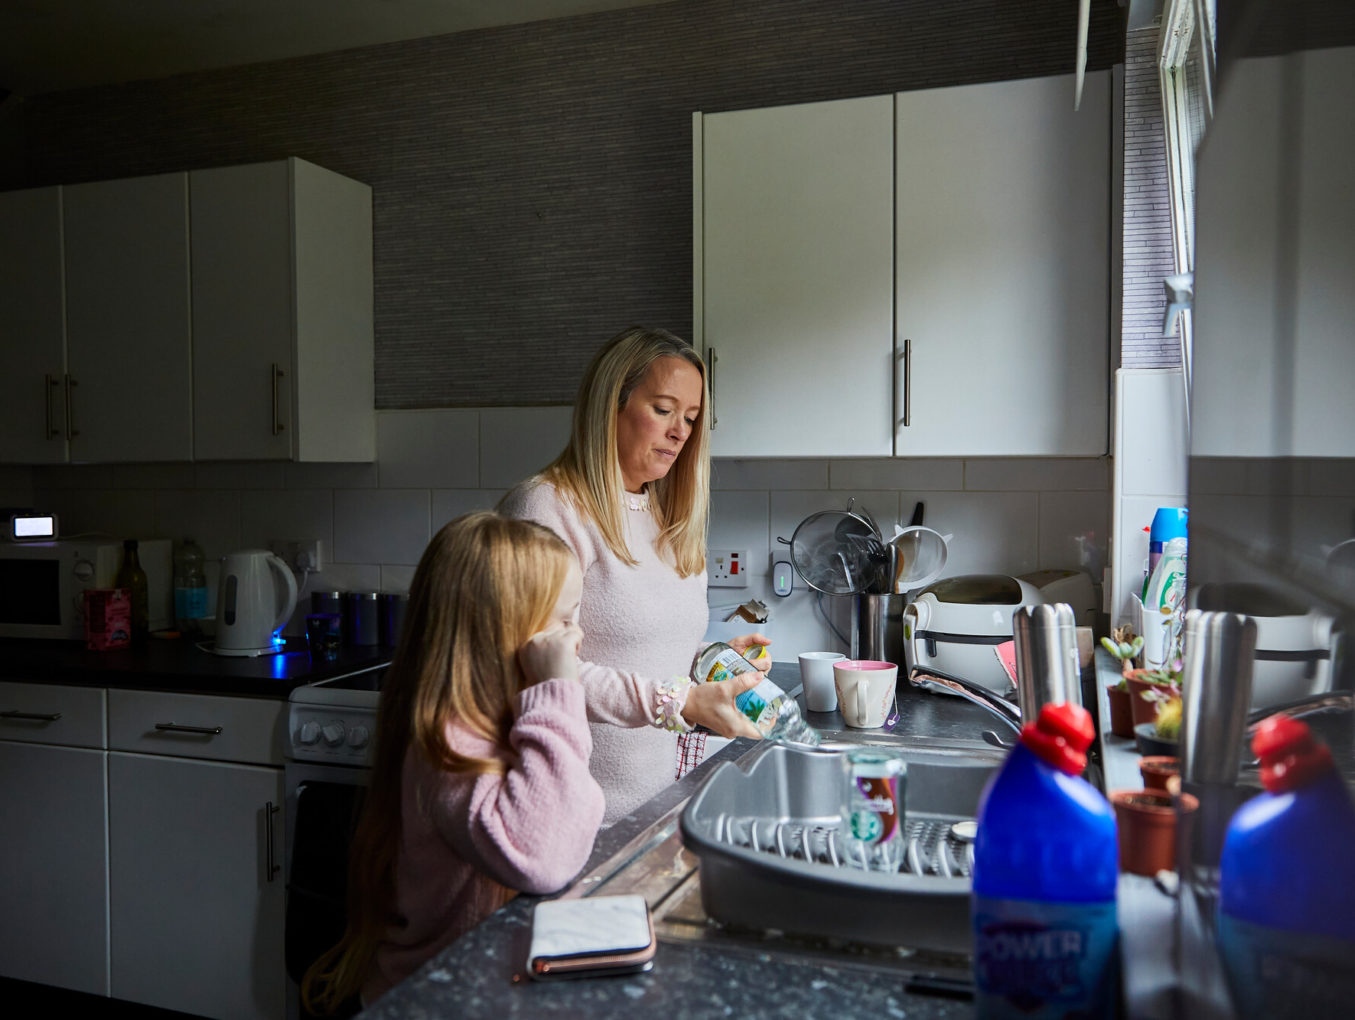 Spring Statement: avoiding eviction or eating – the stark choice facing struggling renters with frozen housing benefit